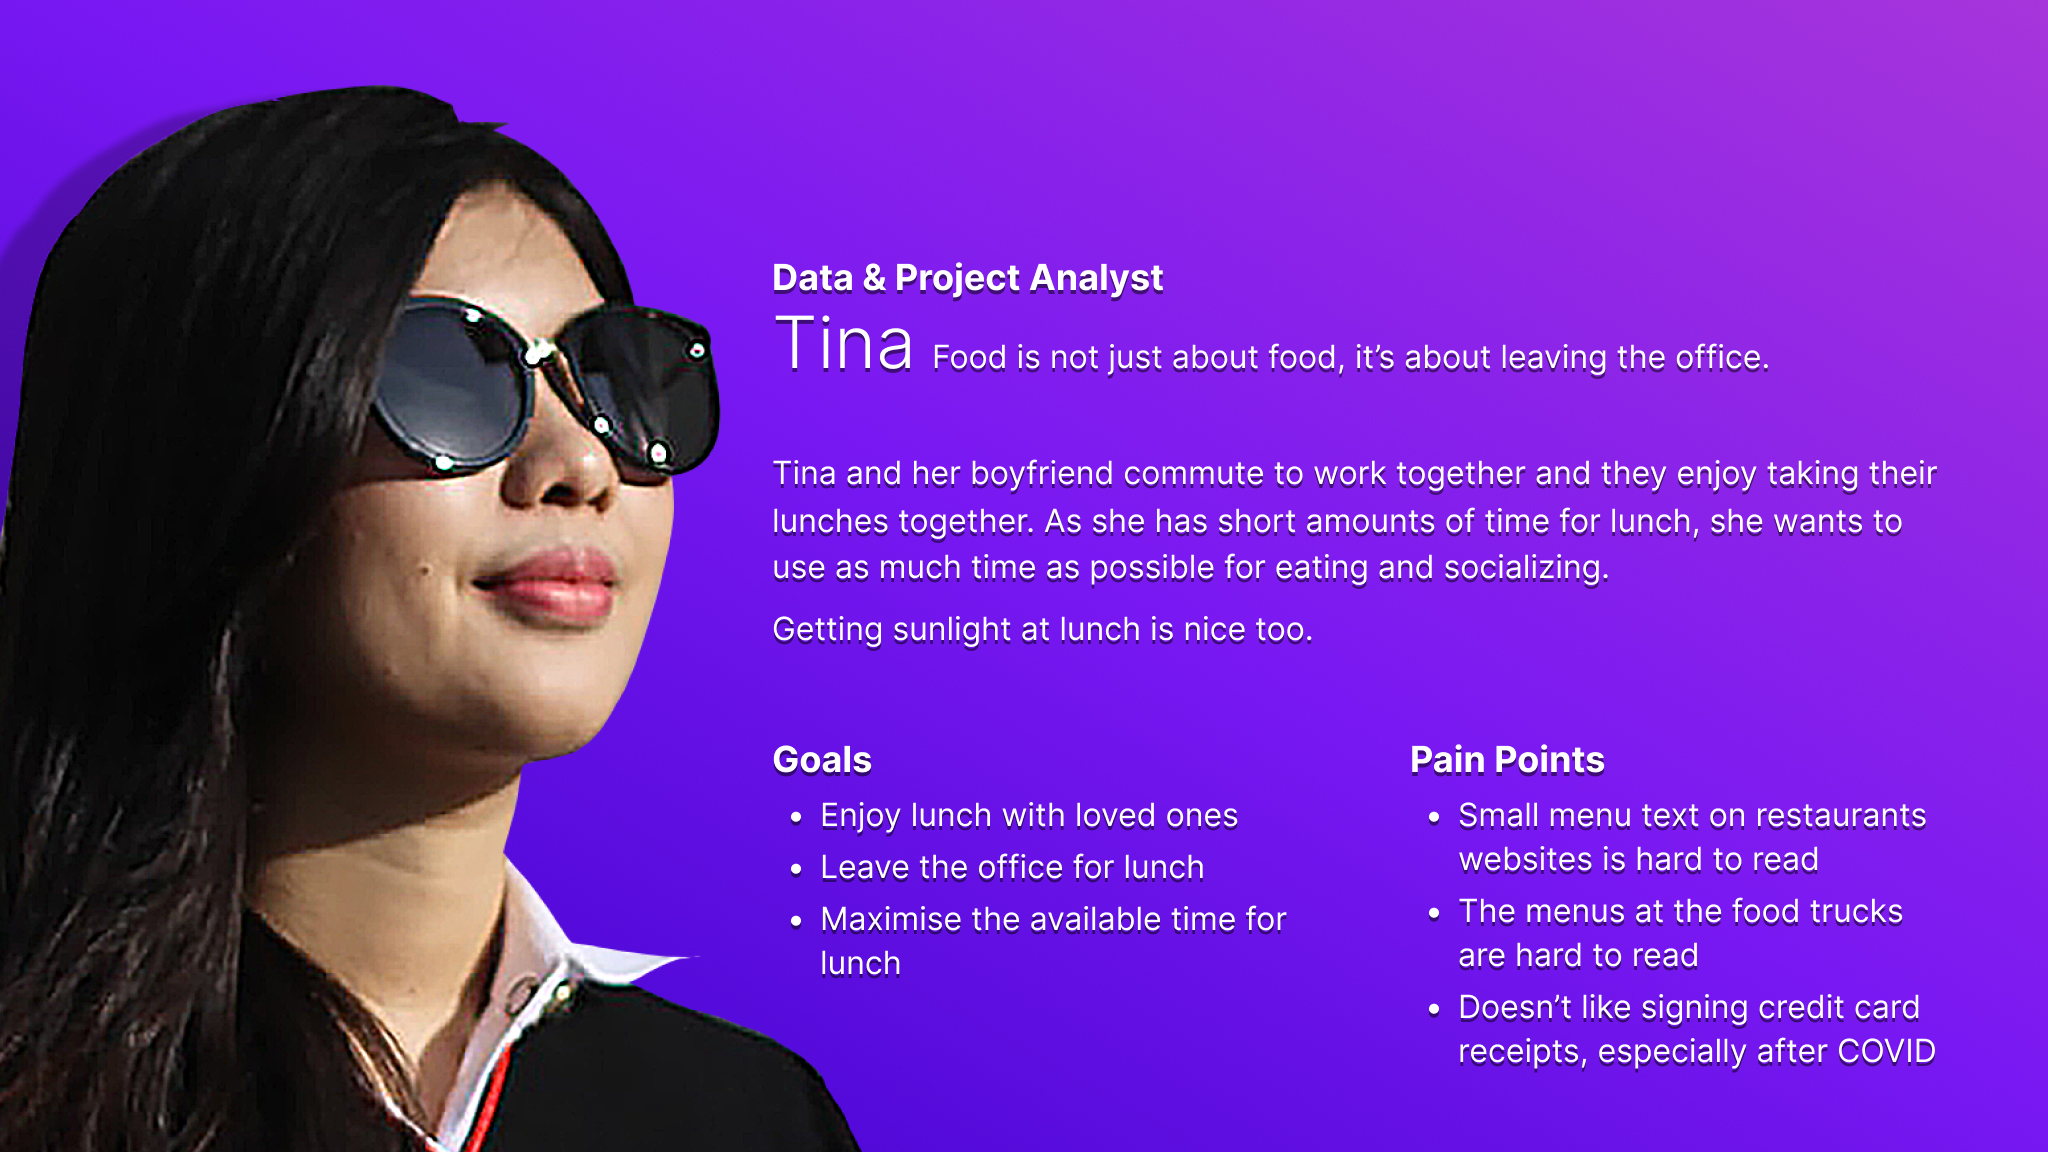 Persona card for Tina, who represents younger food truck site users and users who want a daily food experience.